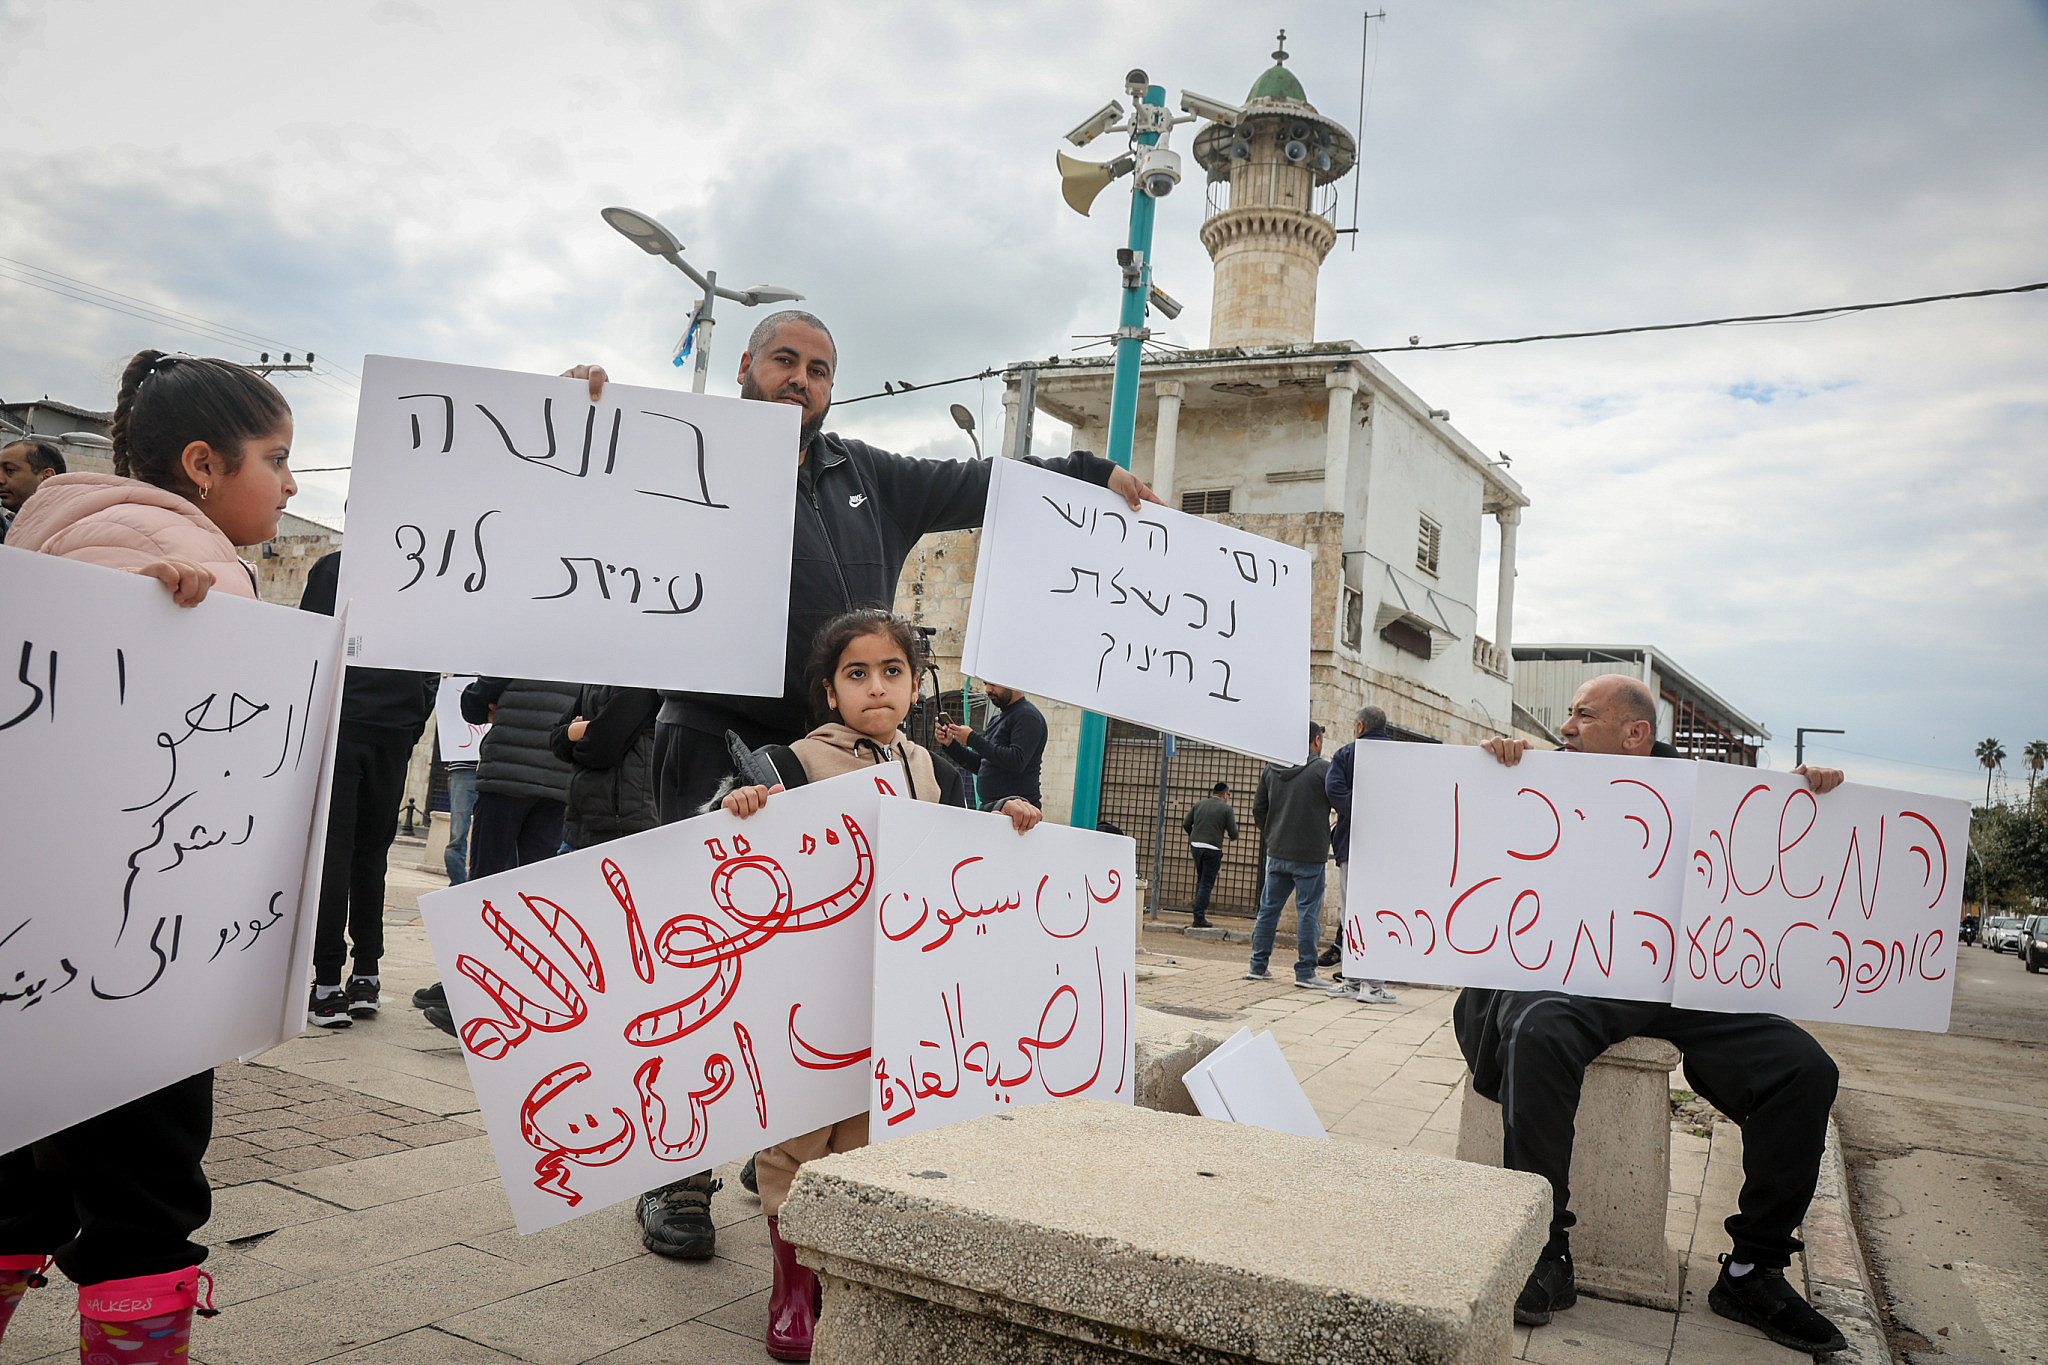 Arab residents of Lod demonstrate against the ongoing violence in the city in Lod, central Israel, February 16, 2023. (Flash90)